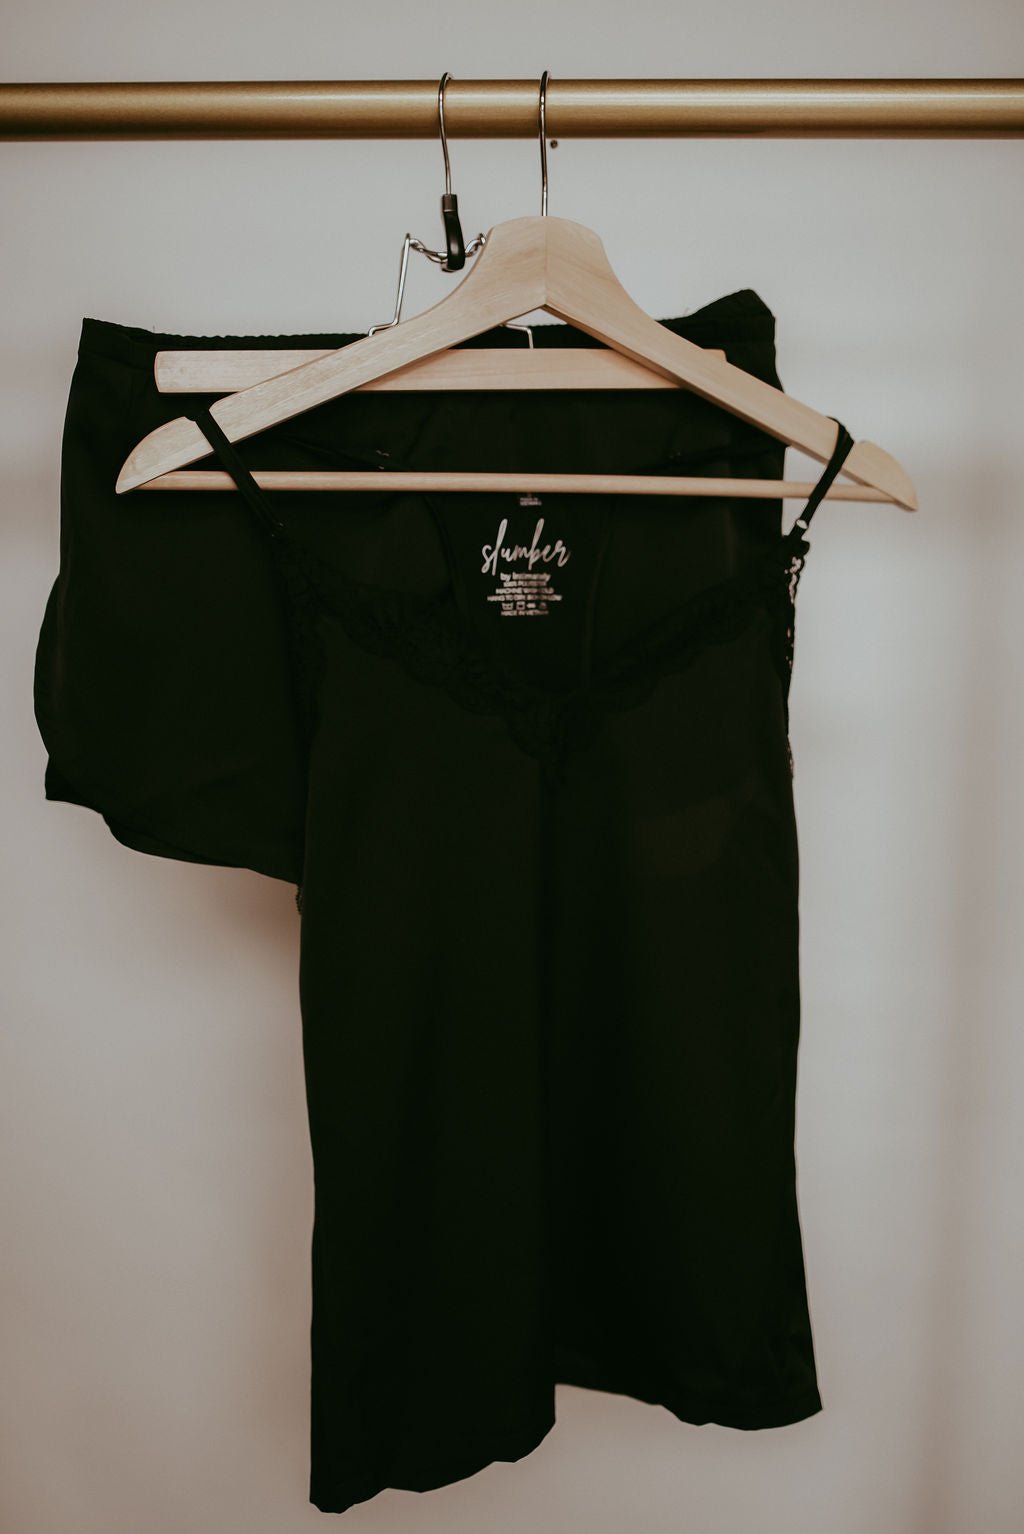 The intimately slumber pj tank in black perfect to wear to bed.